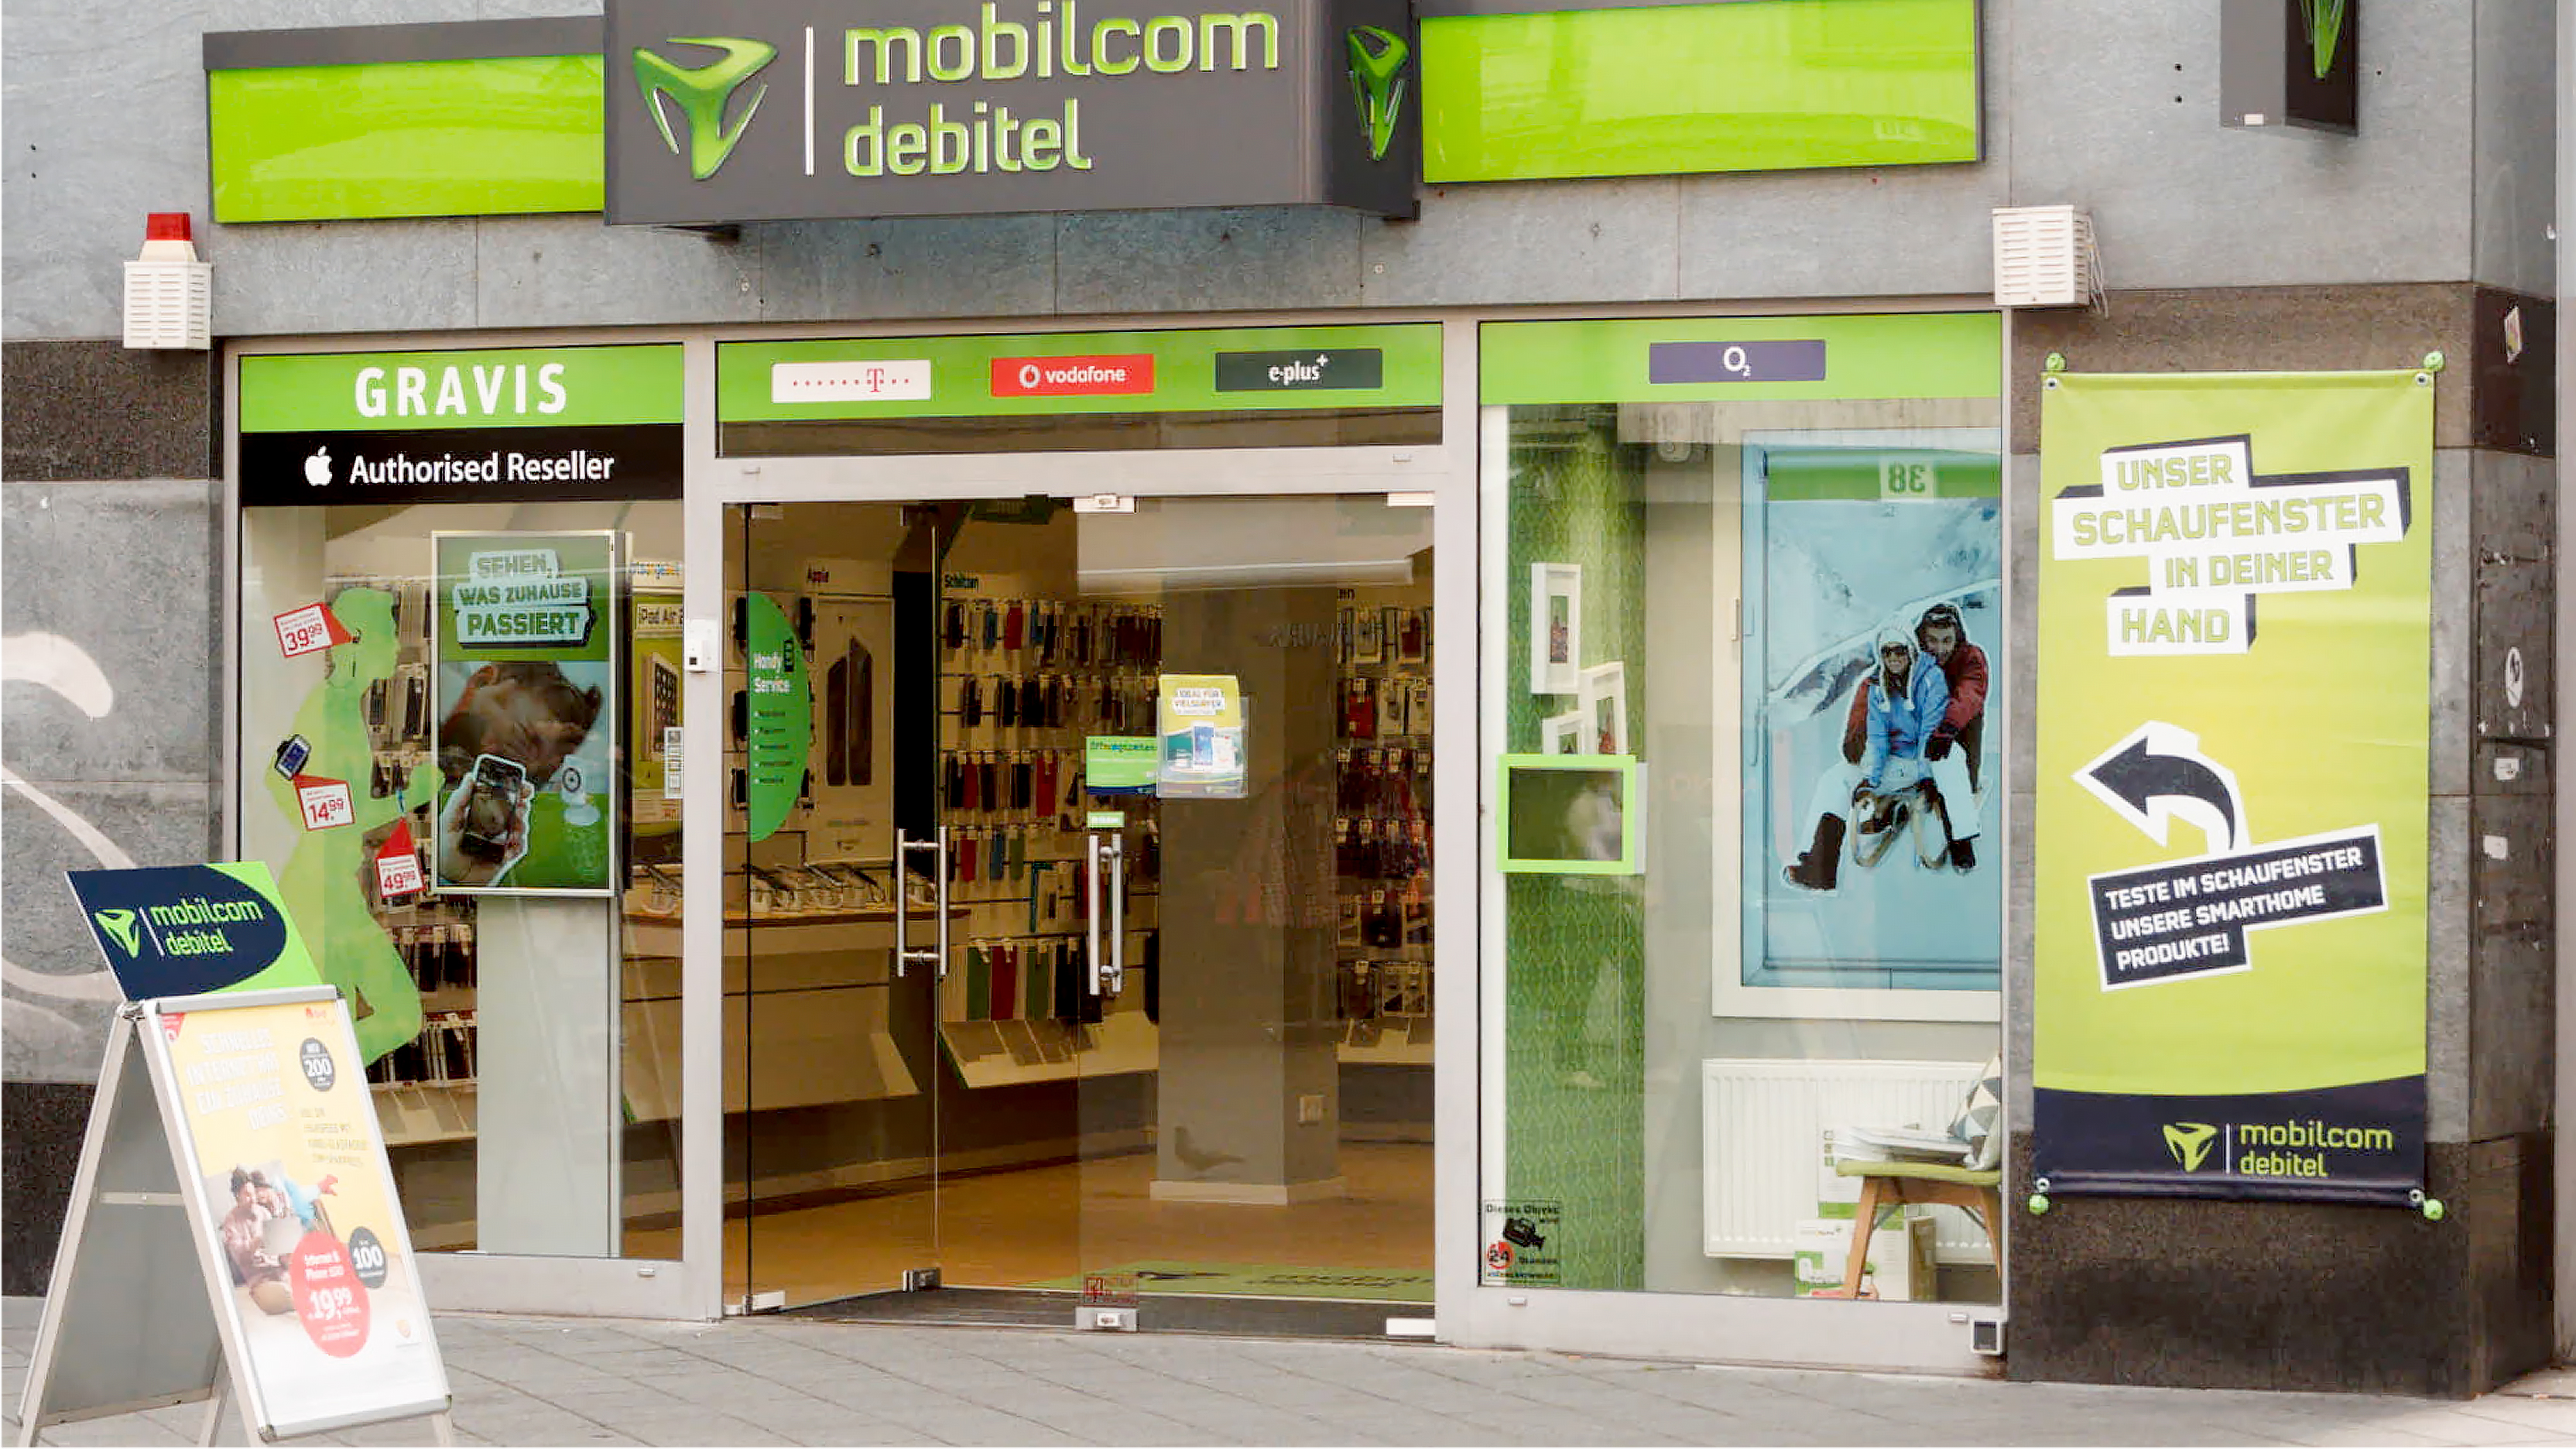 The entrance of the mobile phone store with digital signs